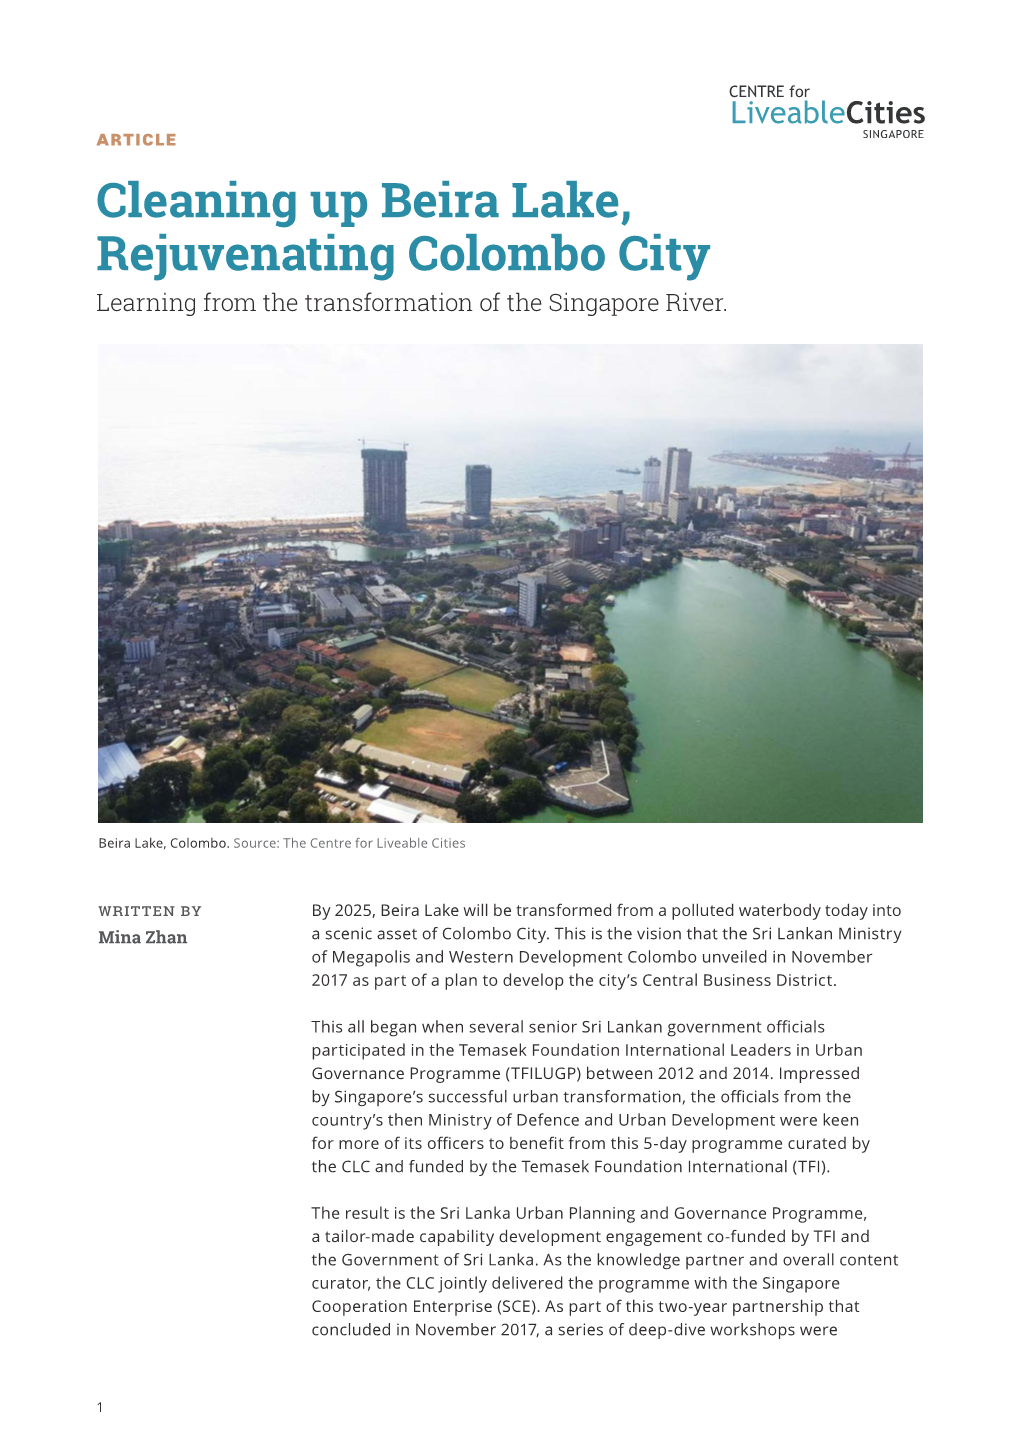 Cleaning up Beira Lake, Rejuvenating Colombo City Learning from the Transformation of the Singapore River